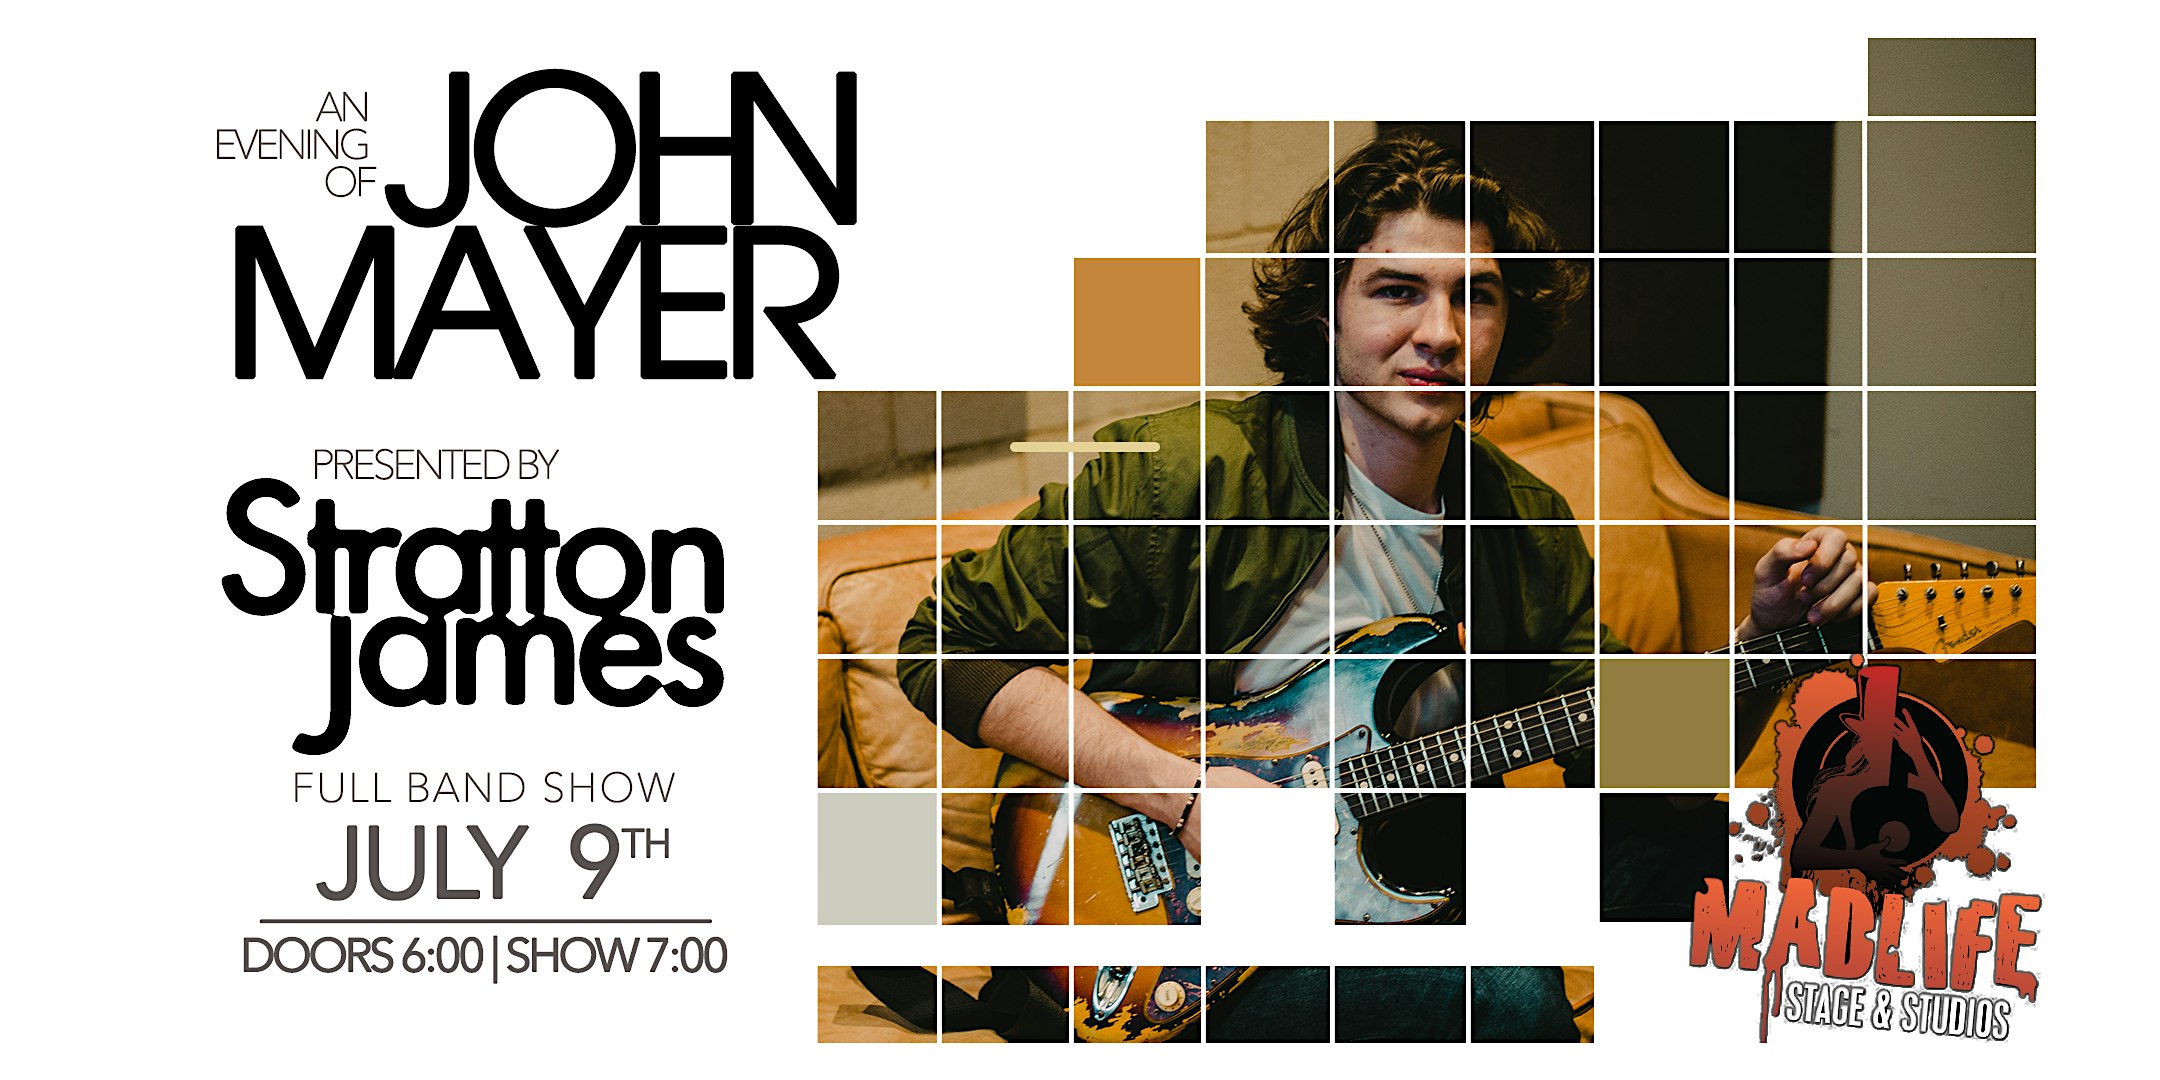 John Mayer Tribute presented by Stratton James